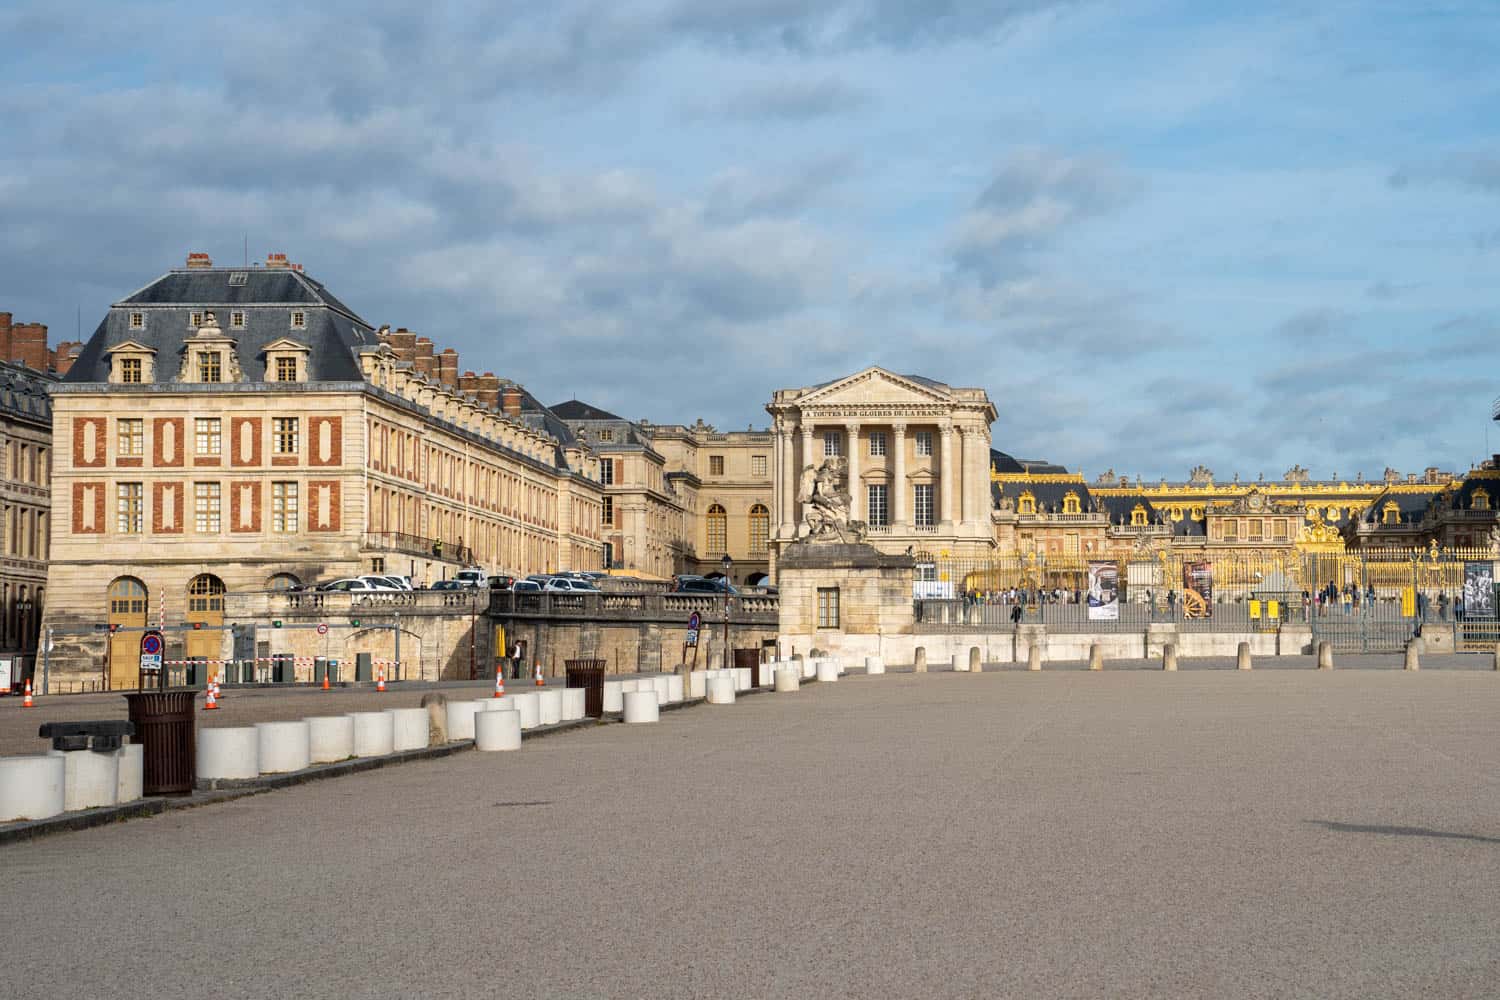 Palace of Versailles | Versailles day trip from Paris